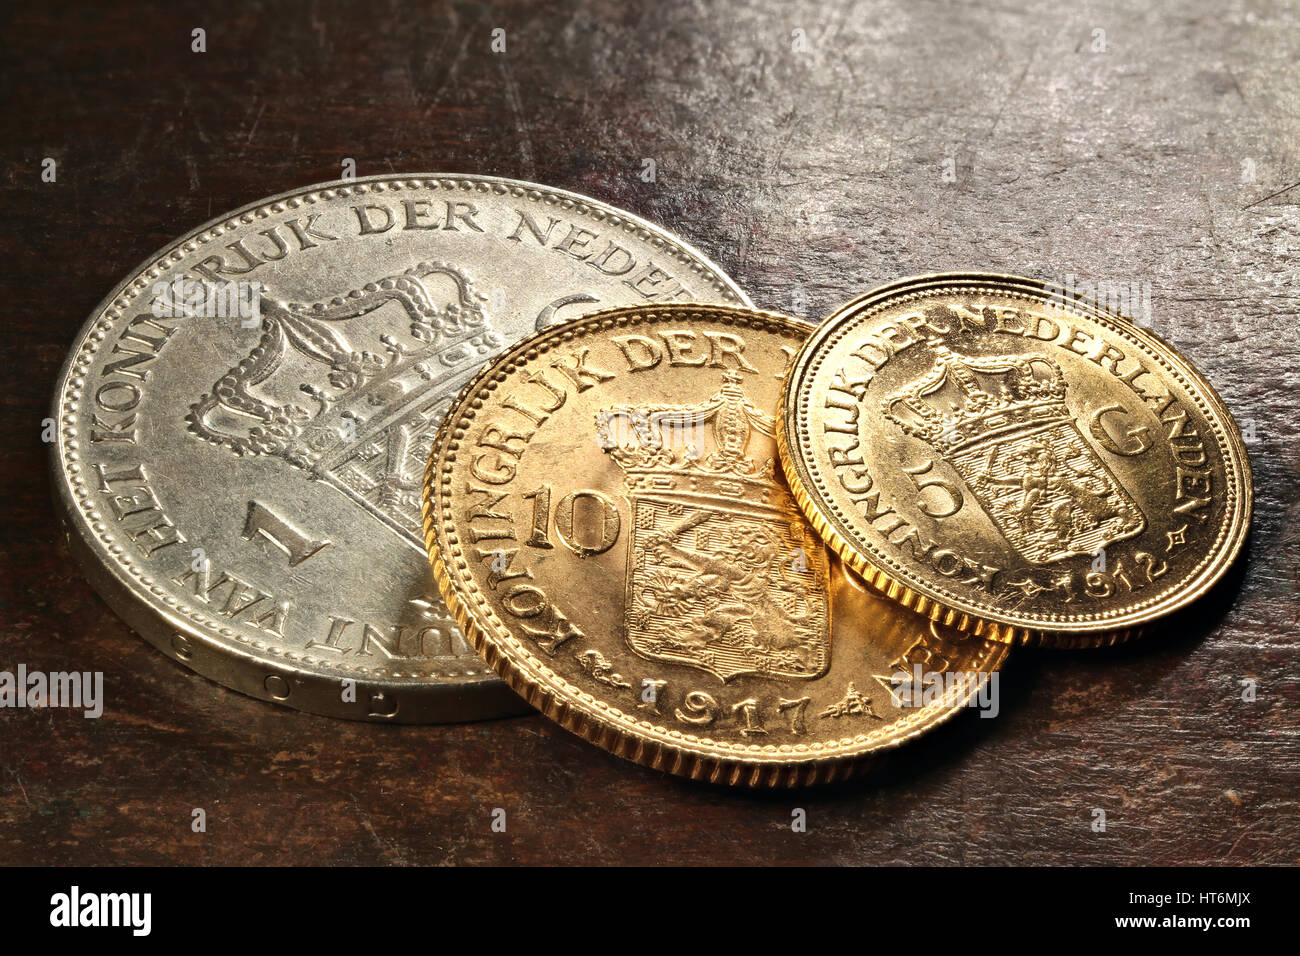 Dutch silver and gold coins on rustic wooden background Stock Photo